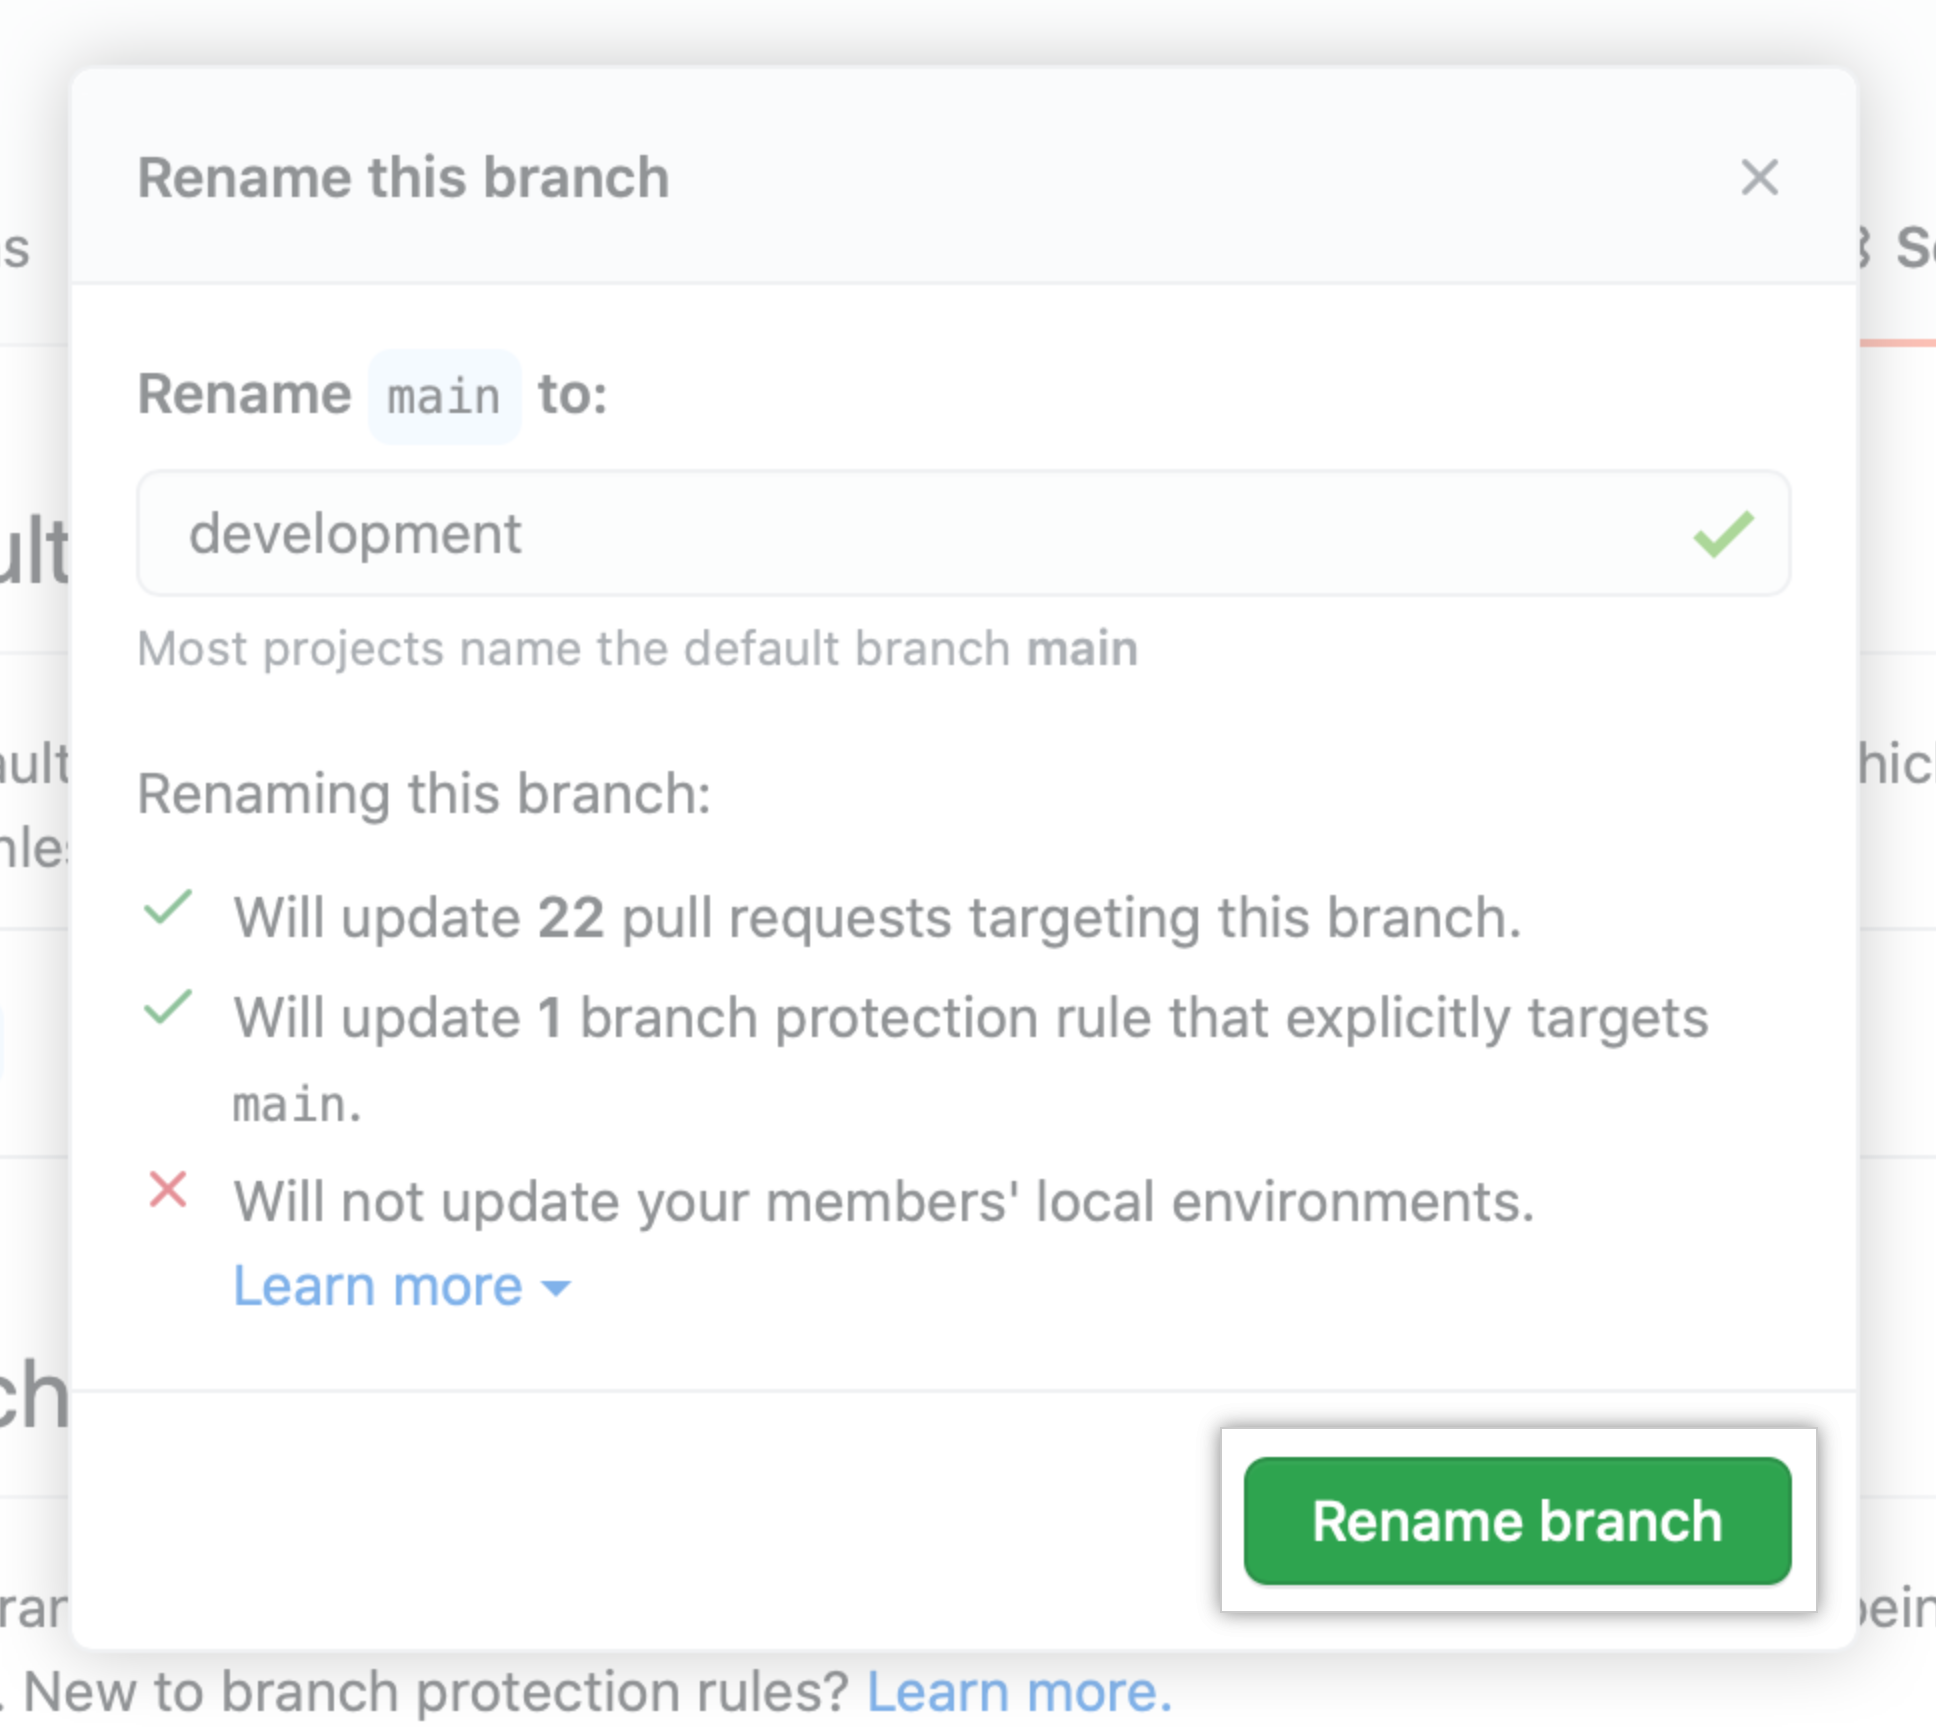 Local environment information and "Rename branch" button